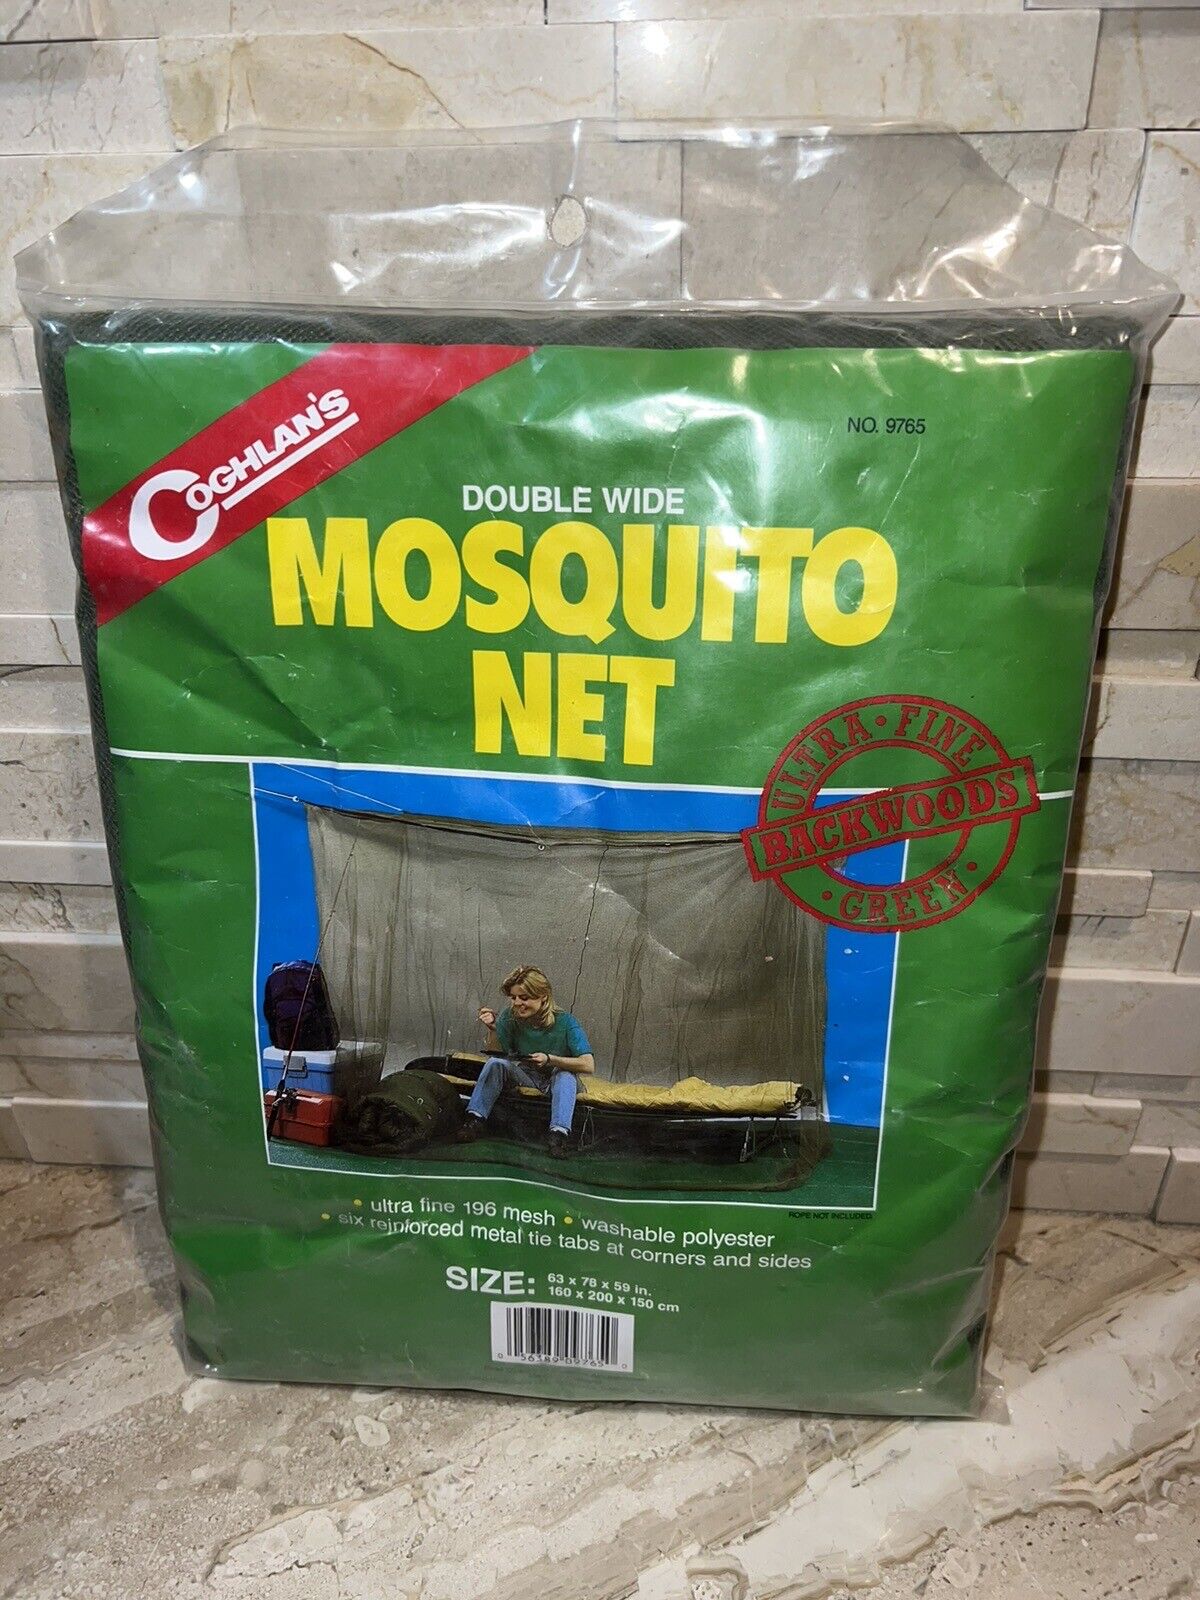 Coghlan's Double Wide Mosquito Net, Green, Mesh Netting SEALED